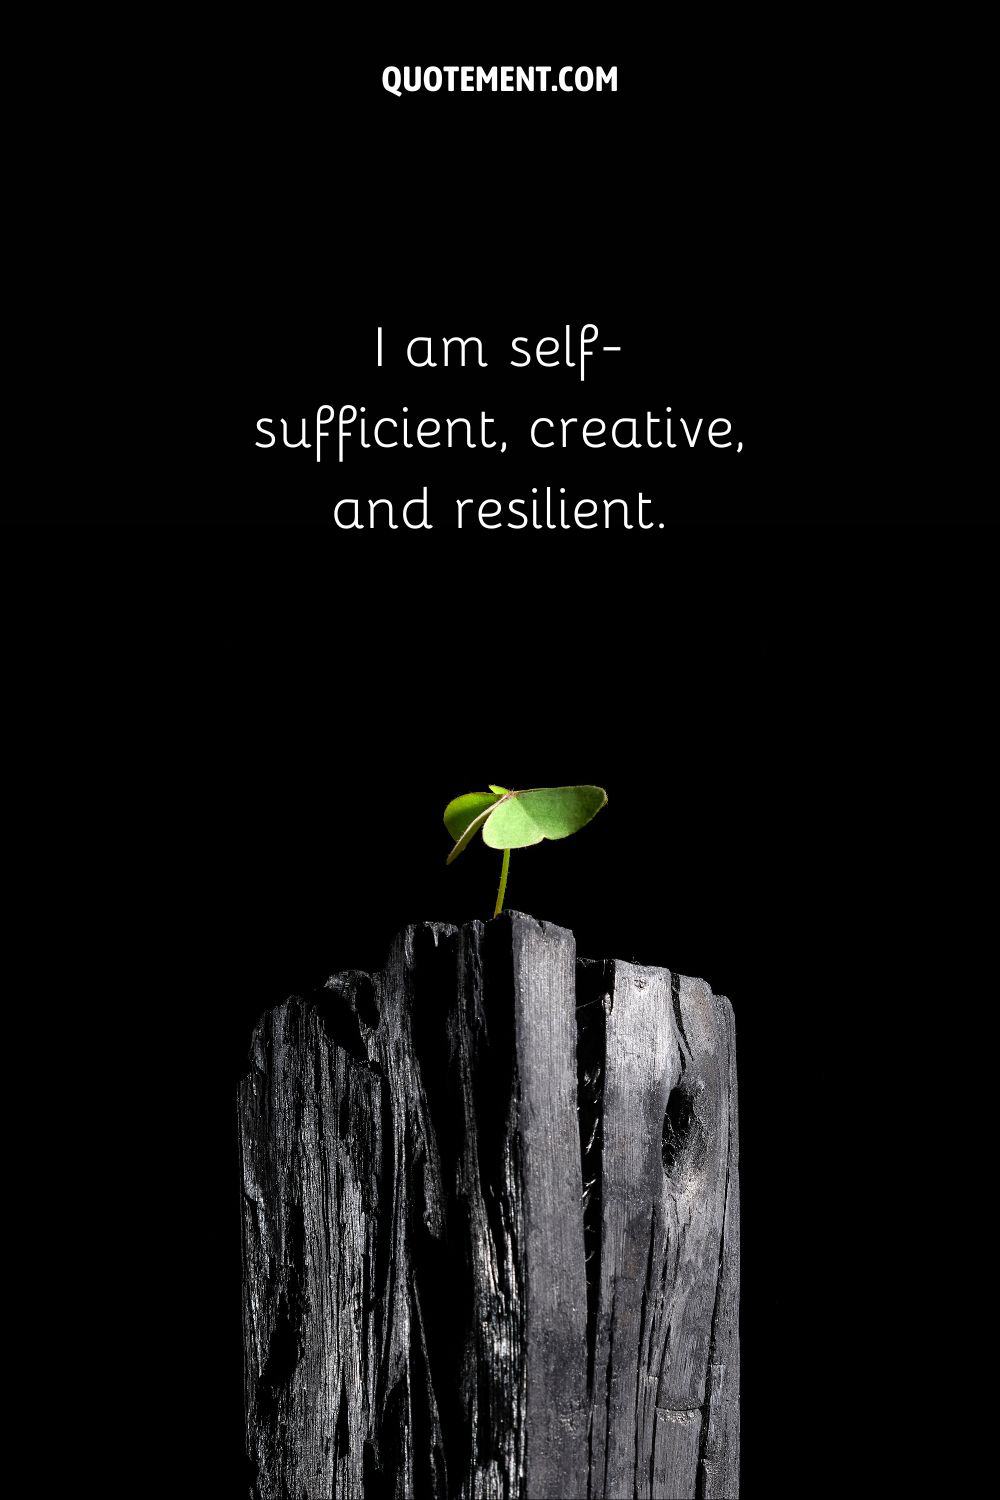 I am self-sufficient, creative, and resilient